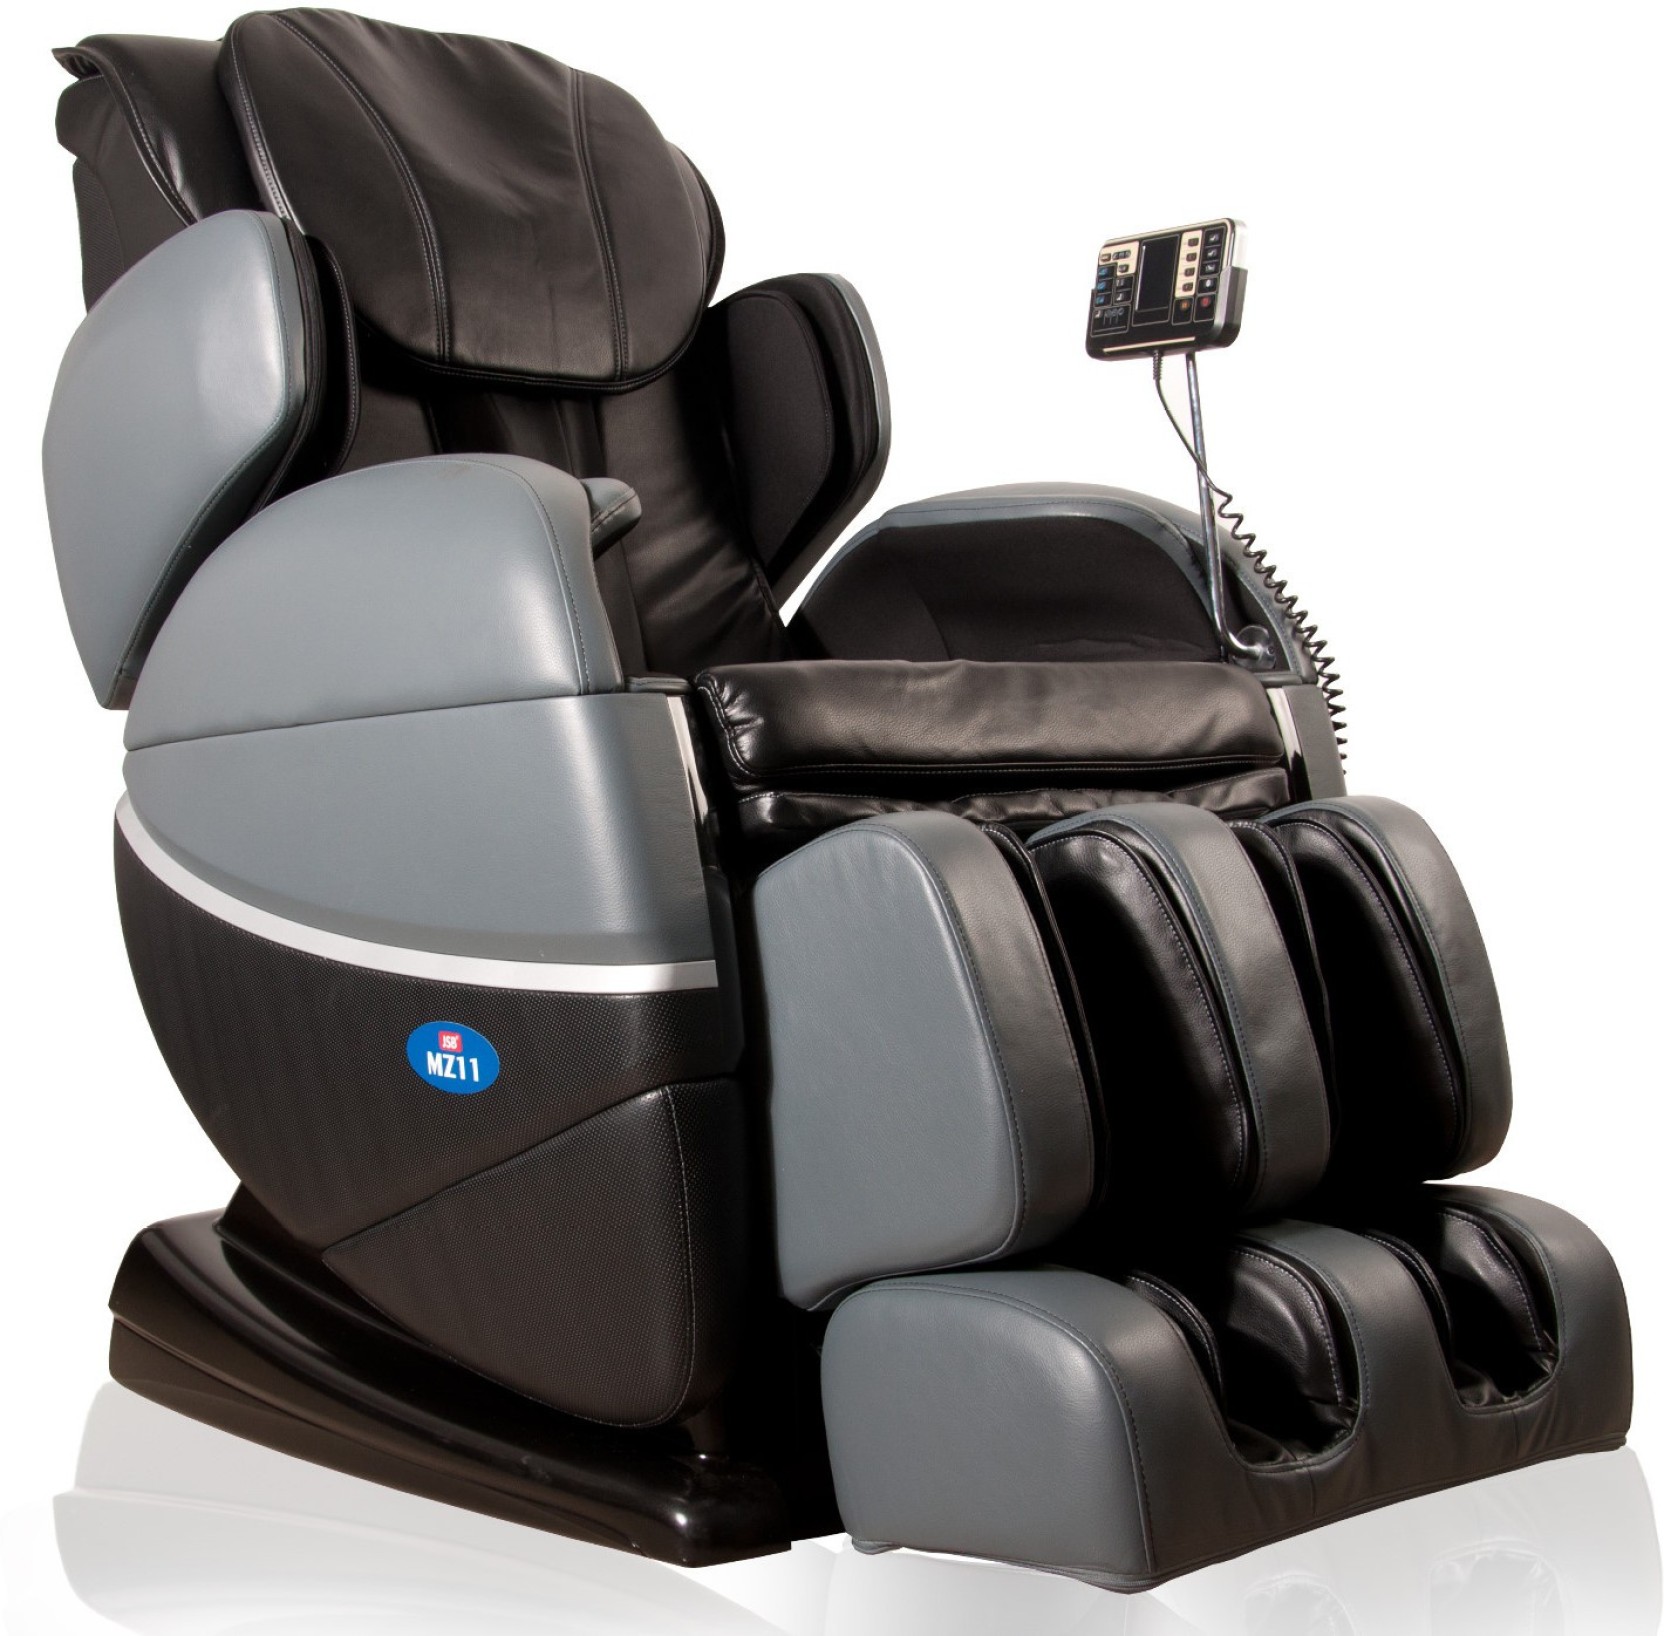 Jsb Mz11 Full Body Massage Chair Recliner Massager Price In India